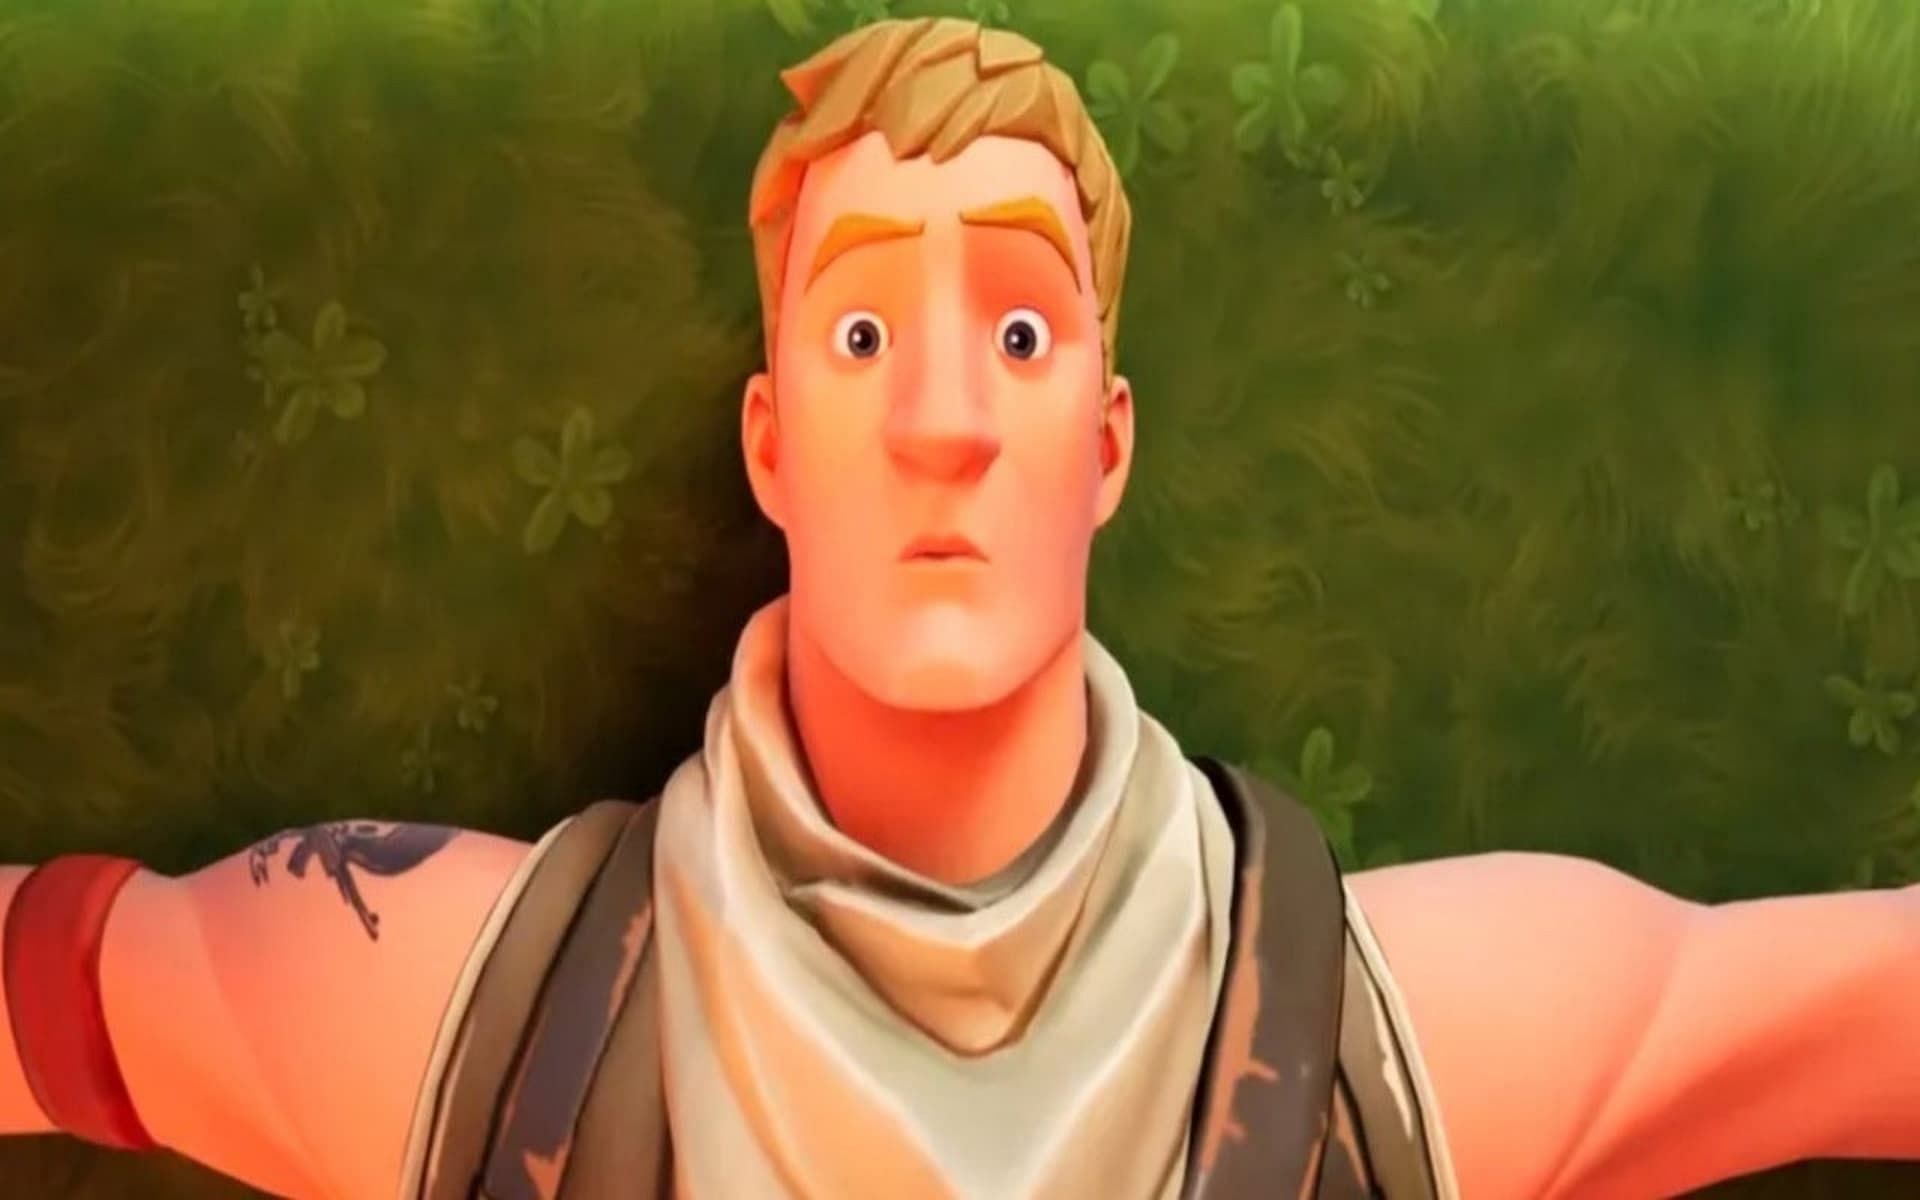 Jonesy is one of the several default skins in Fortnite (Image via Epic Games)